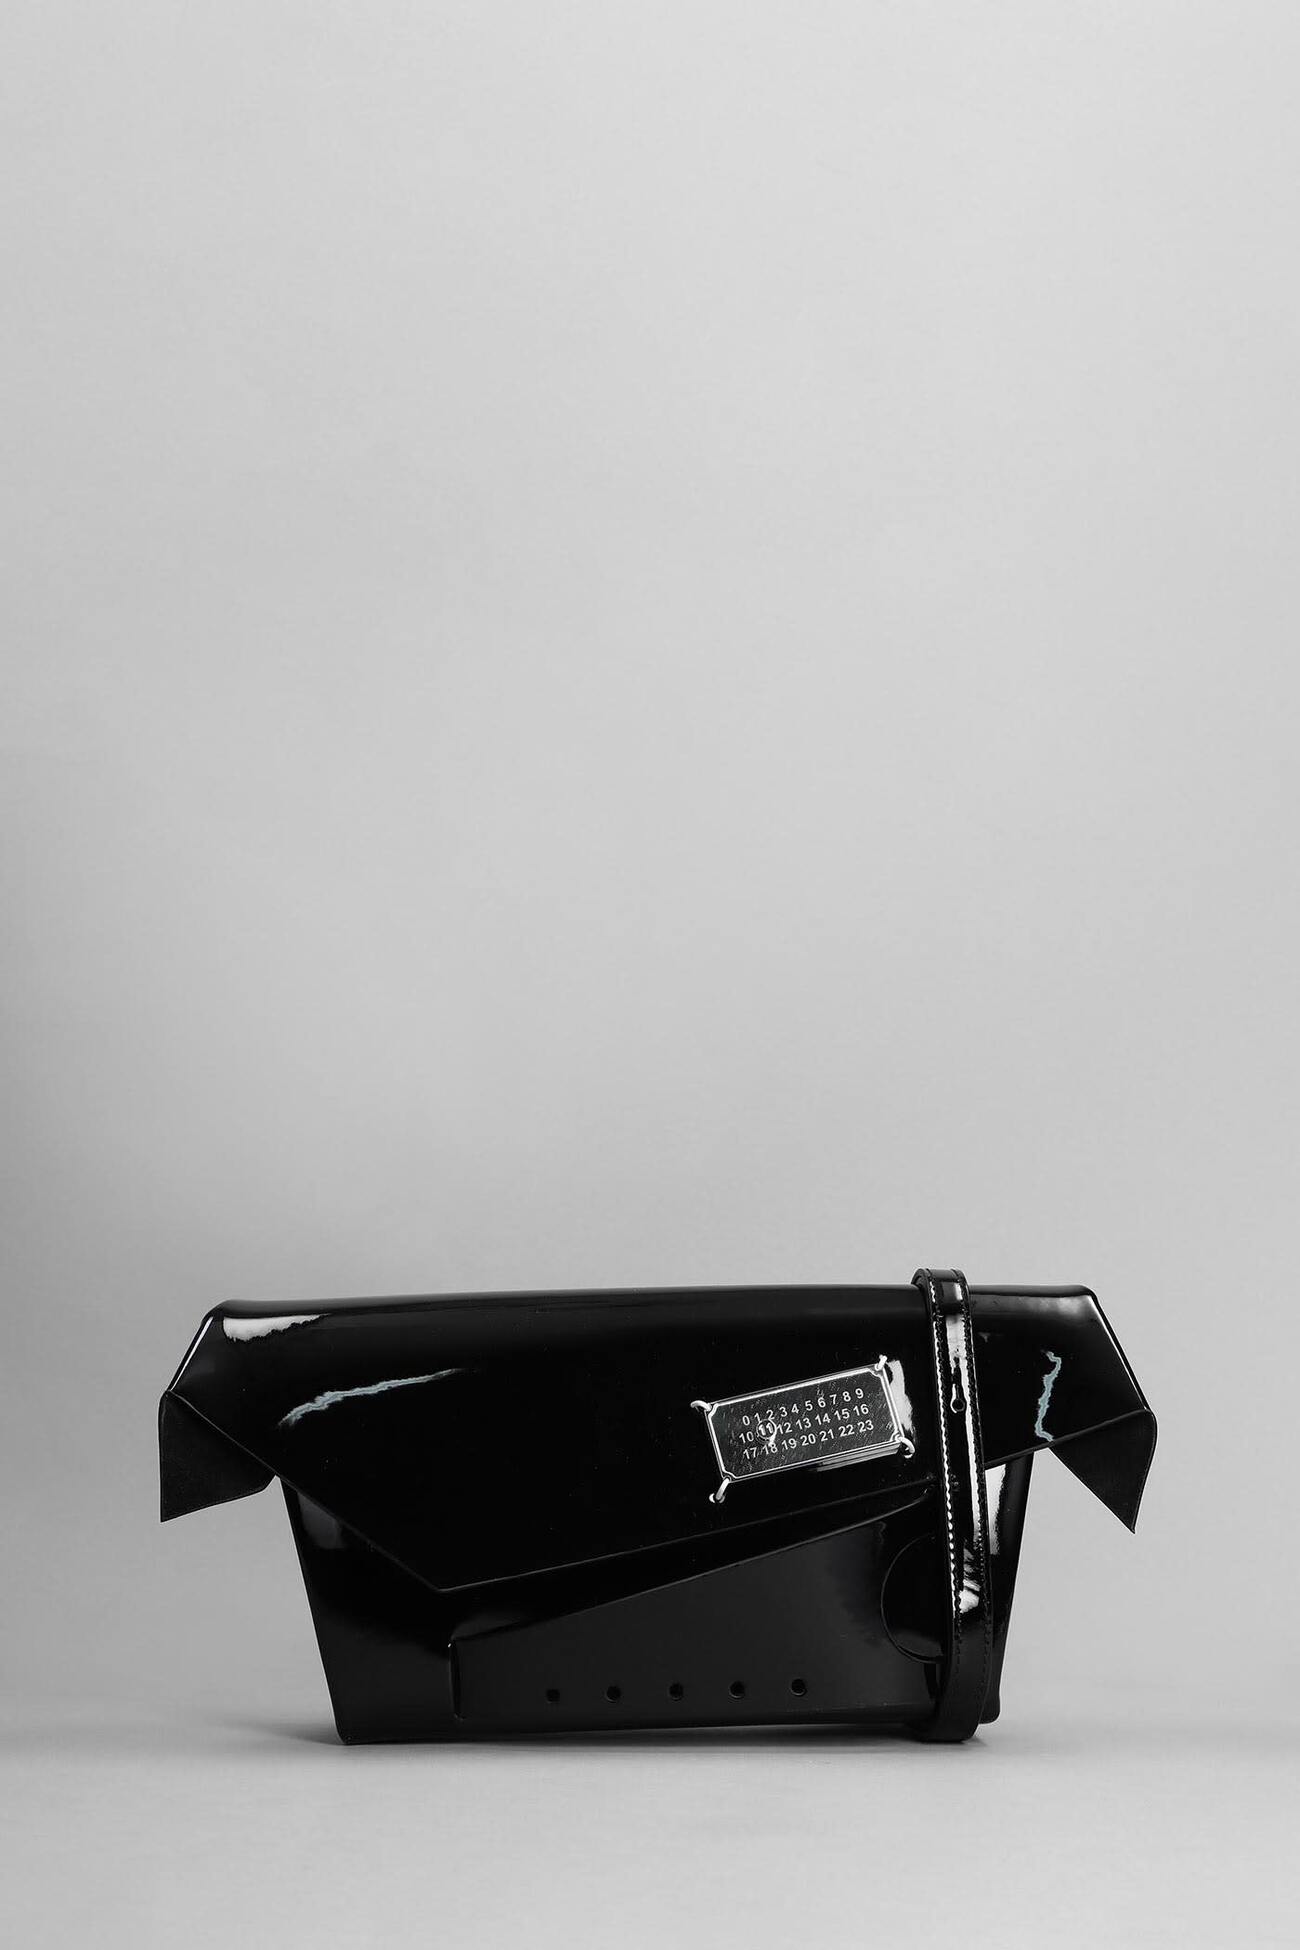 Maison Margiela Snatched Mini Hand Bag In Black Patent Leather